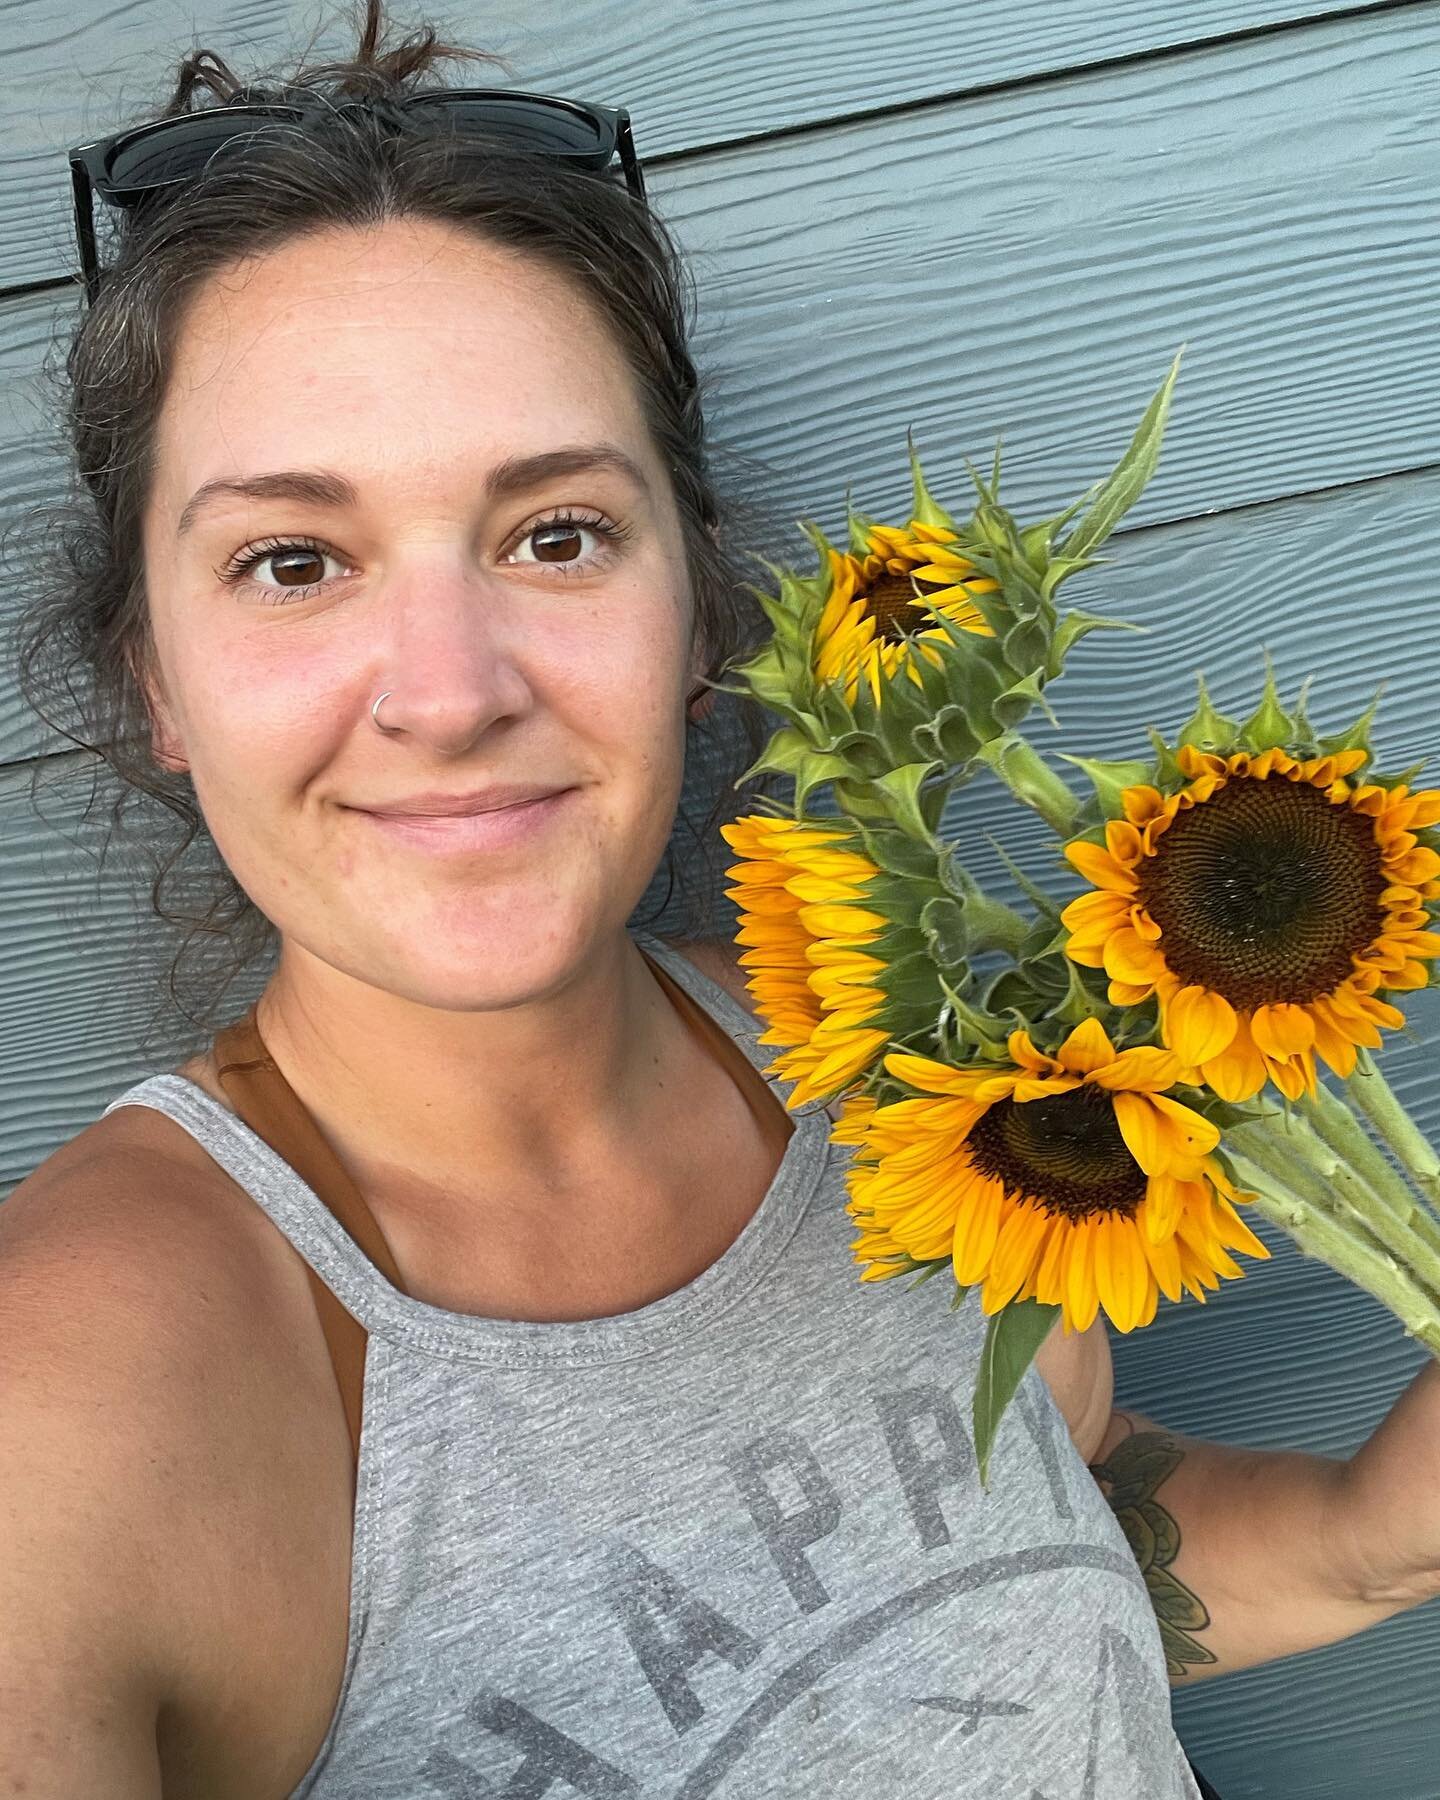 We have tons of sunflowers ready for @franklincountyfarmersmarket this Saturday! Small dahlia arrangements, the first batch of Fleur fetti, and restocked Rookery Flower T-shirts will be available too! Want to reserve and just pick up? Shoot us a mess